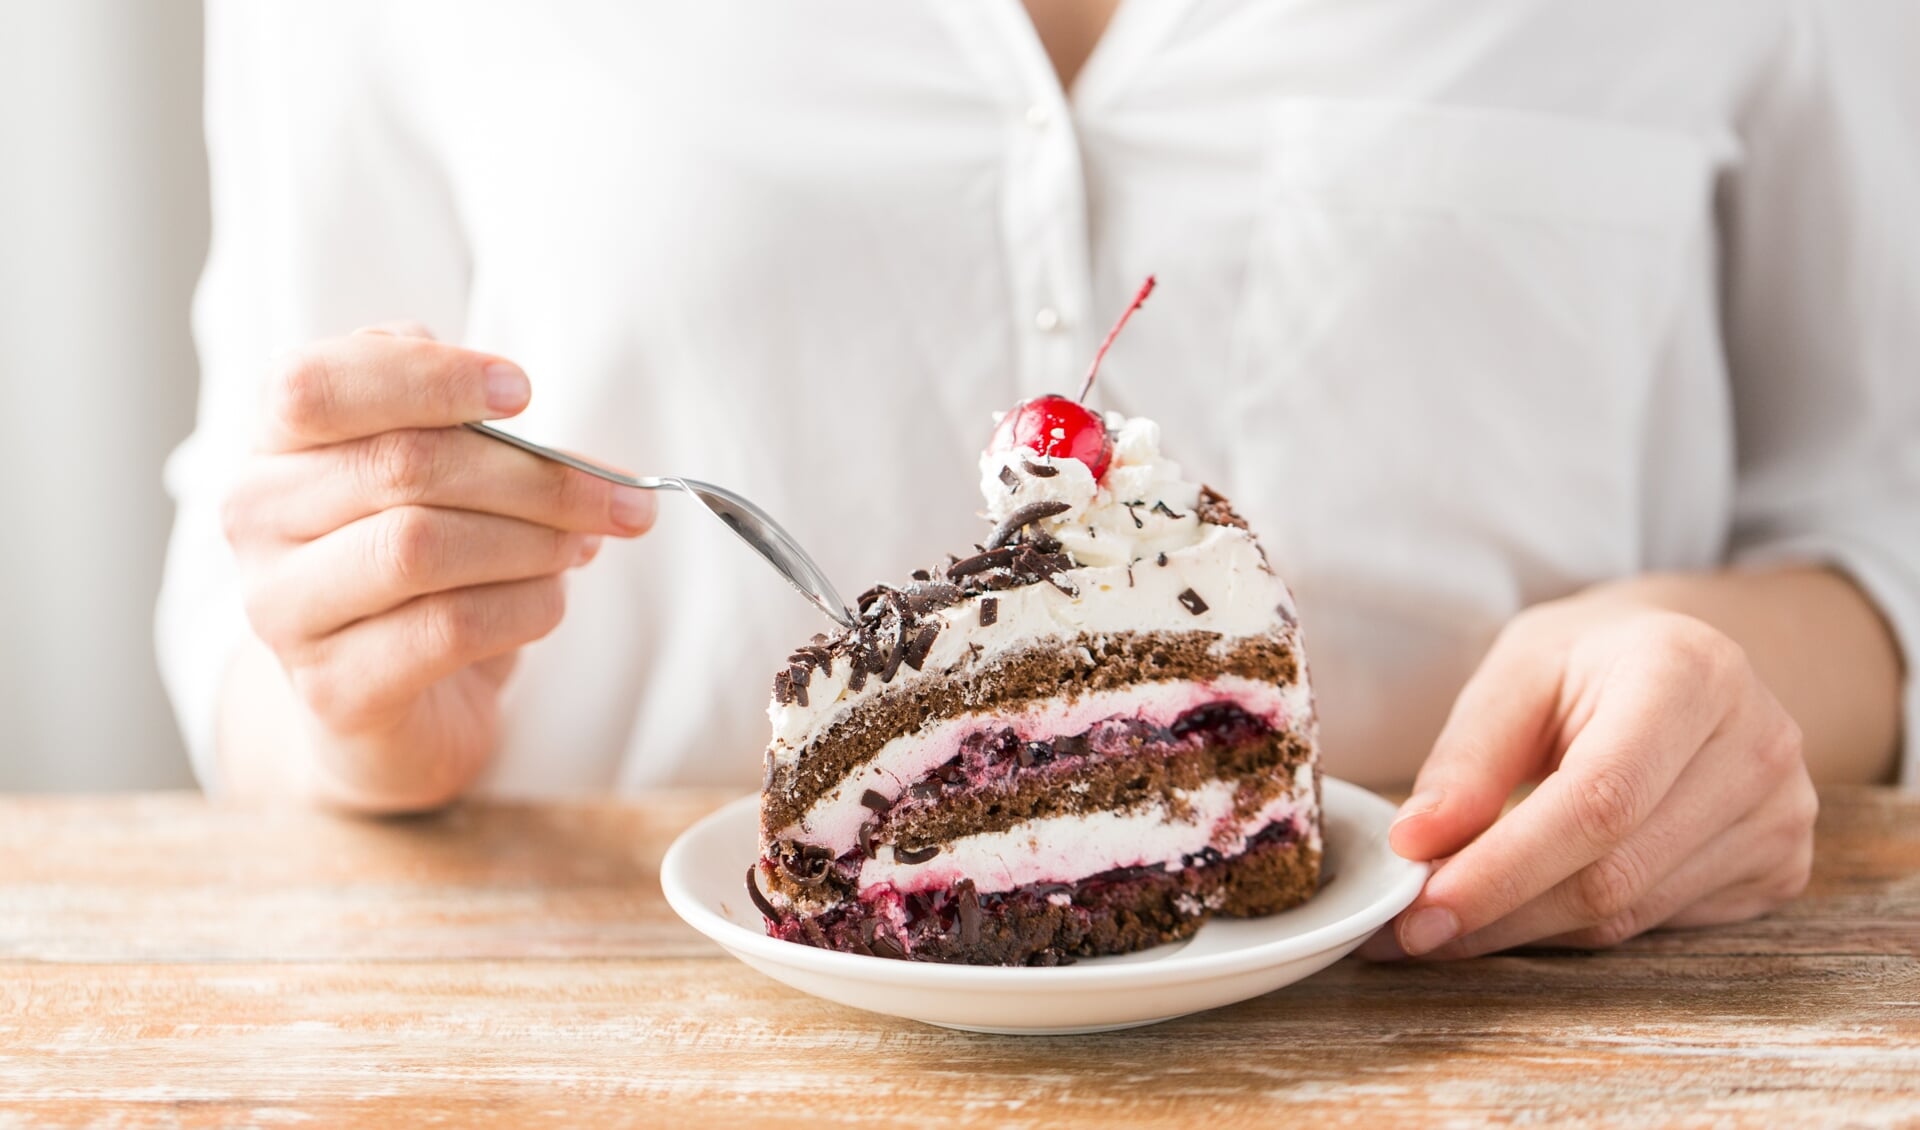 food, dessert and pastry concept - close up of woman eating piece of chocolate layer cake with maraschino cherry